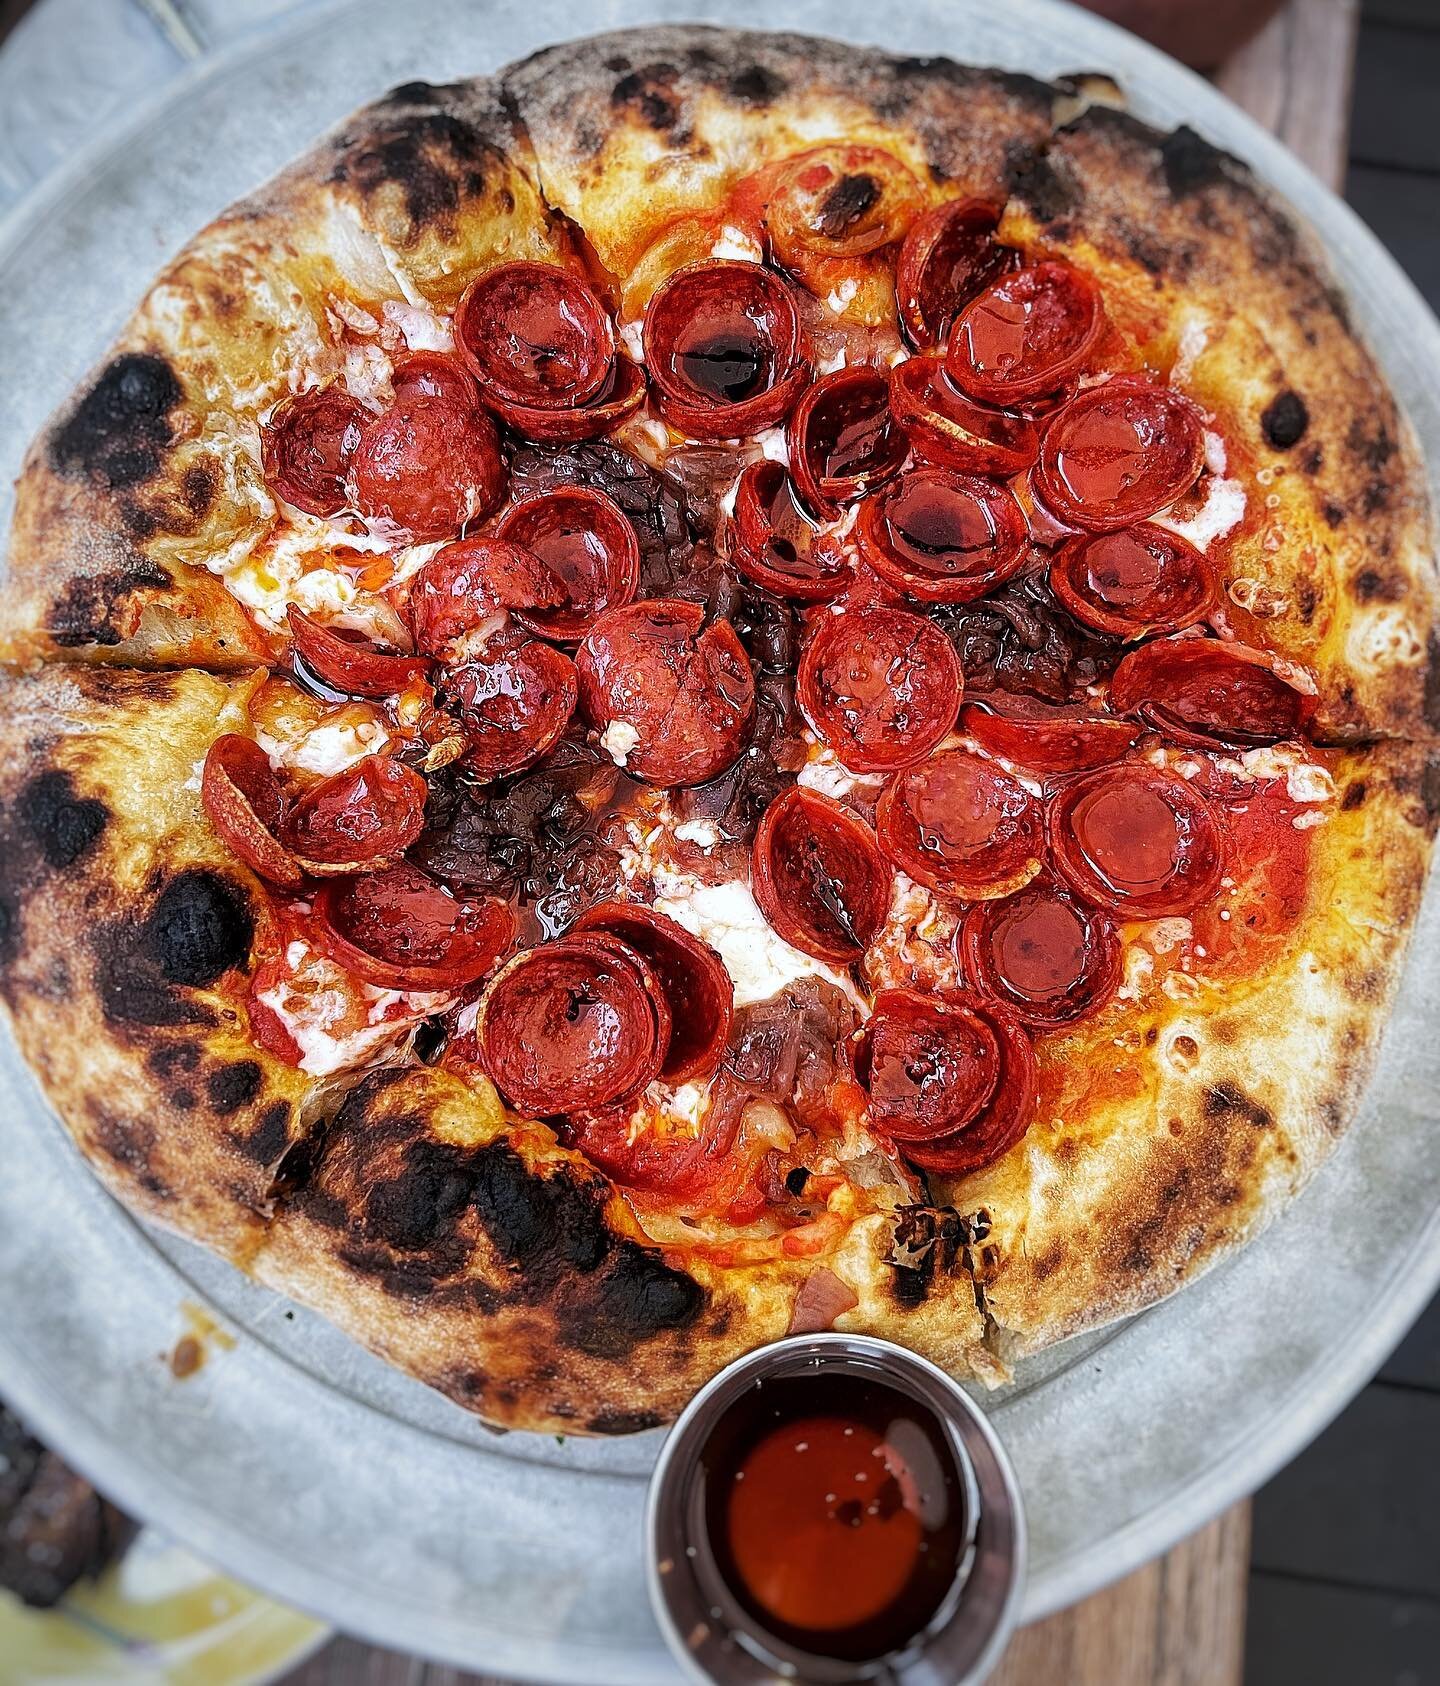 Definitely Best Pizza in Boston 
📍 @sourcerestaurants 
T-10 days #BostonBucketList #BestOfBoston #FridayDateNight 

Pepperoni, caramelized onions &amp; hot honey on a fluffy wood fired pizza dough. Perfection 😍🍕

Roasted Brussel Sprouts in miso ch